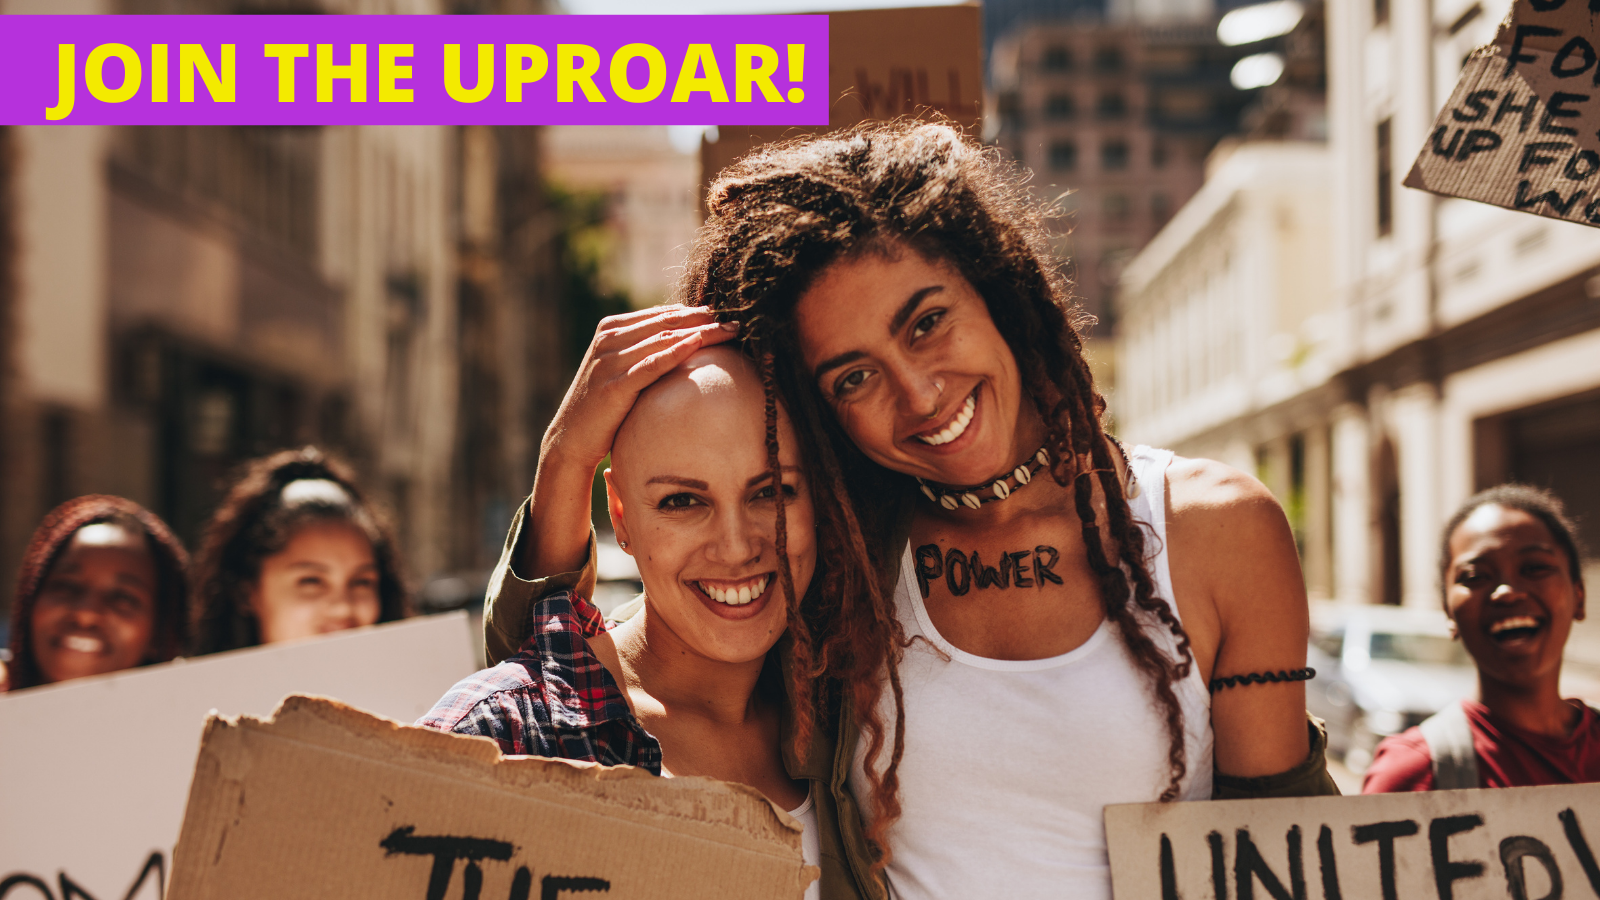 Two women appear side by side and appear to be at a protest. The woman on the left is bald, and lighter skinned. The woman on the right is a person of color with long dreadlocks, she has her hand atop the head of the woman on the left. They are both holding signs that are removed from the frame, but the one on the right appears to say united in all caps.